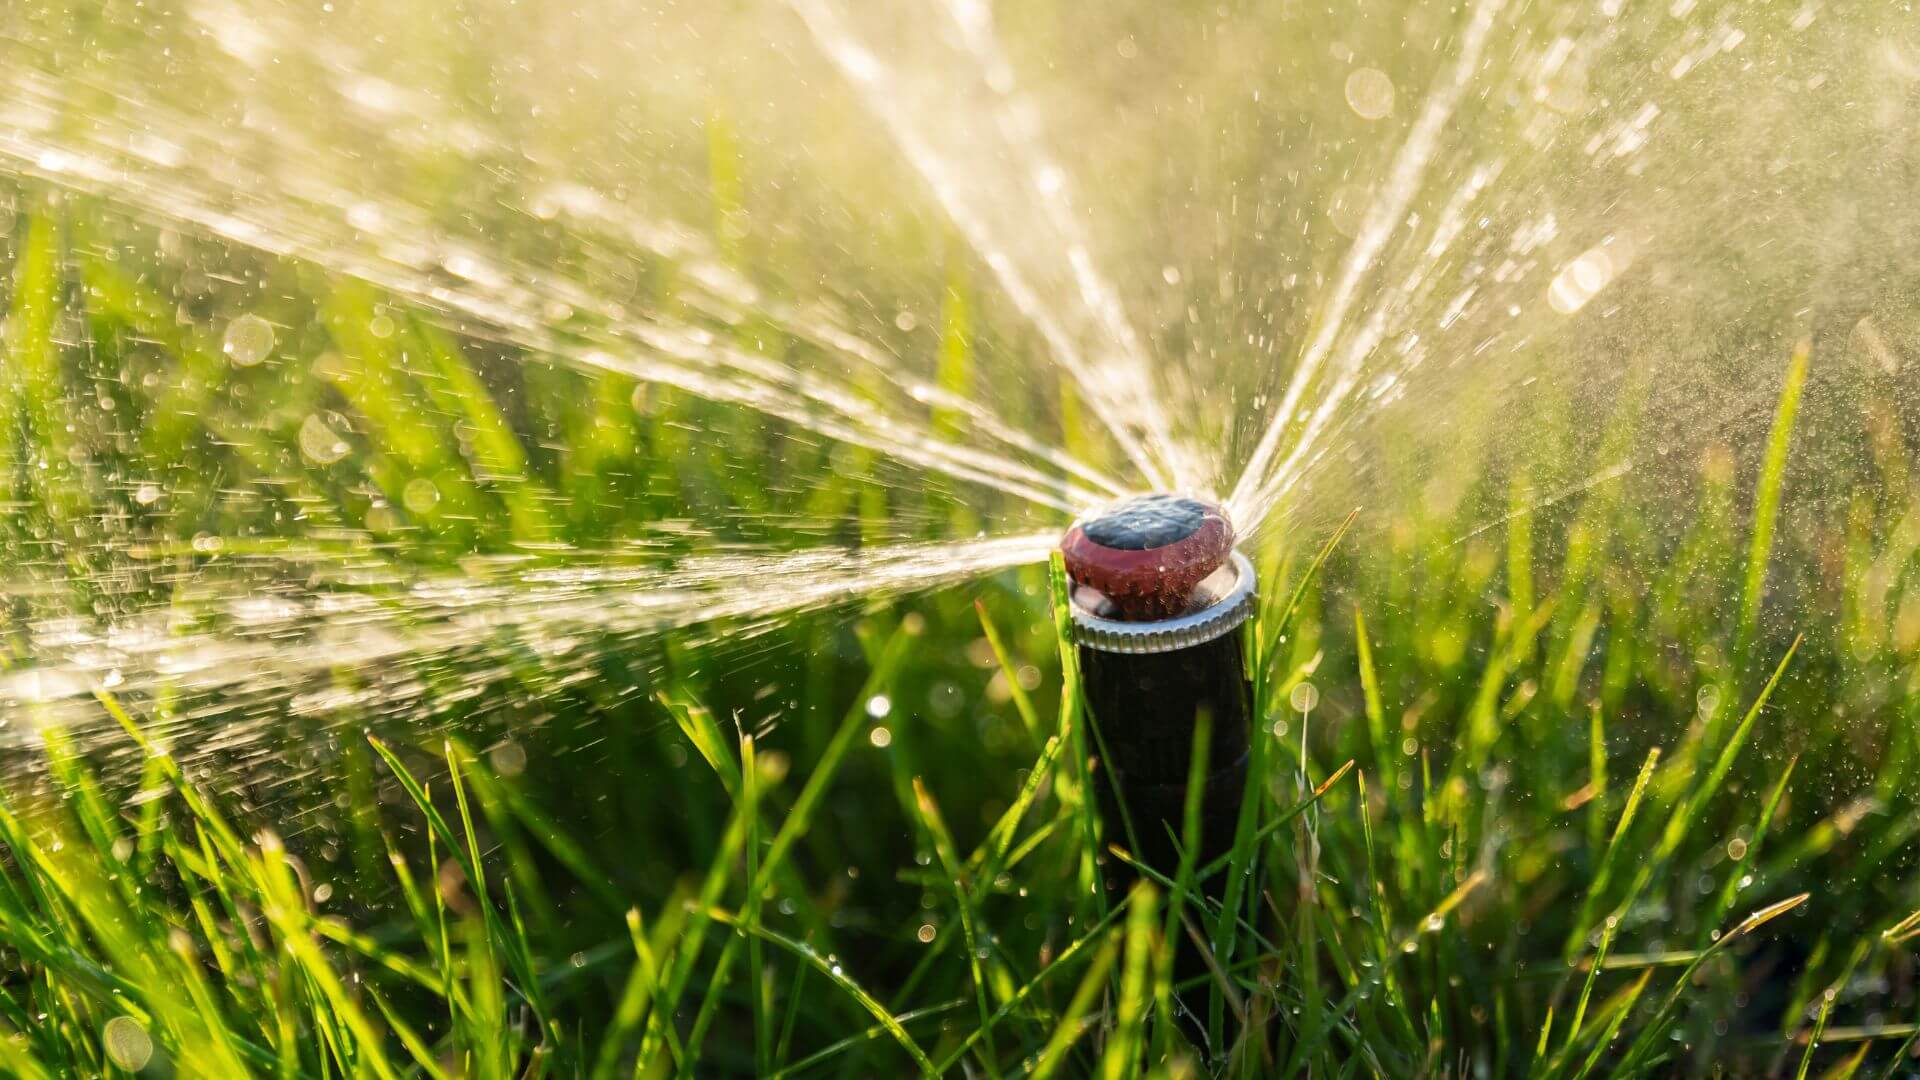 Install a sprinkler system this planting season with America's Plumbing.